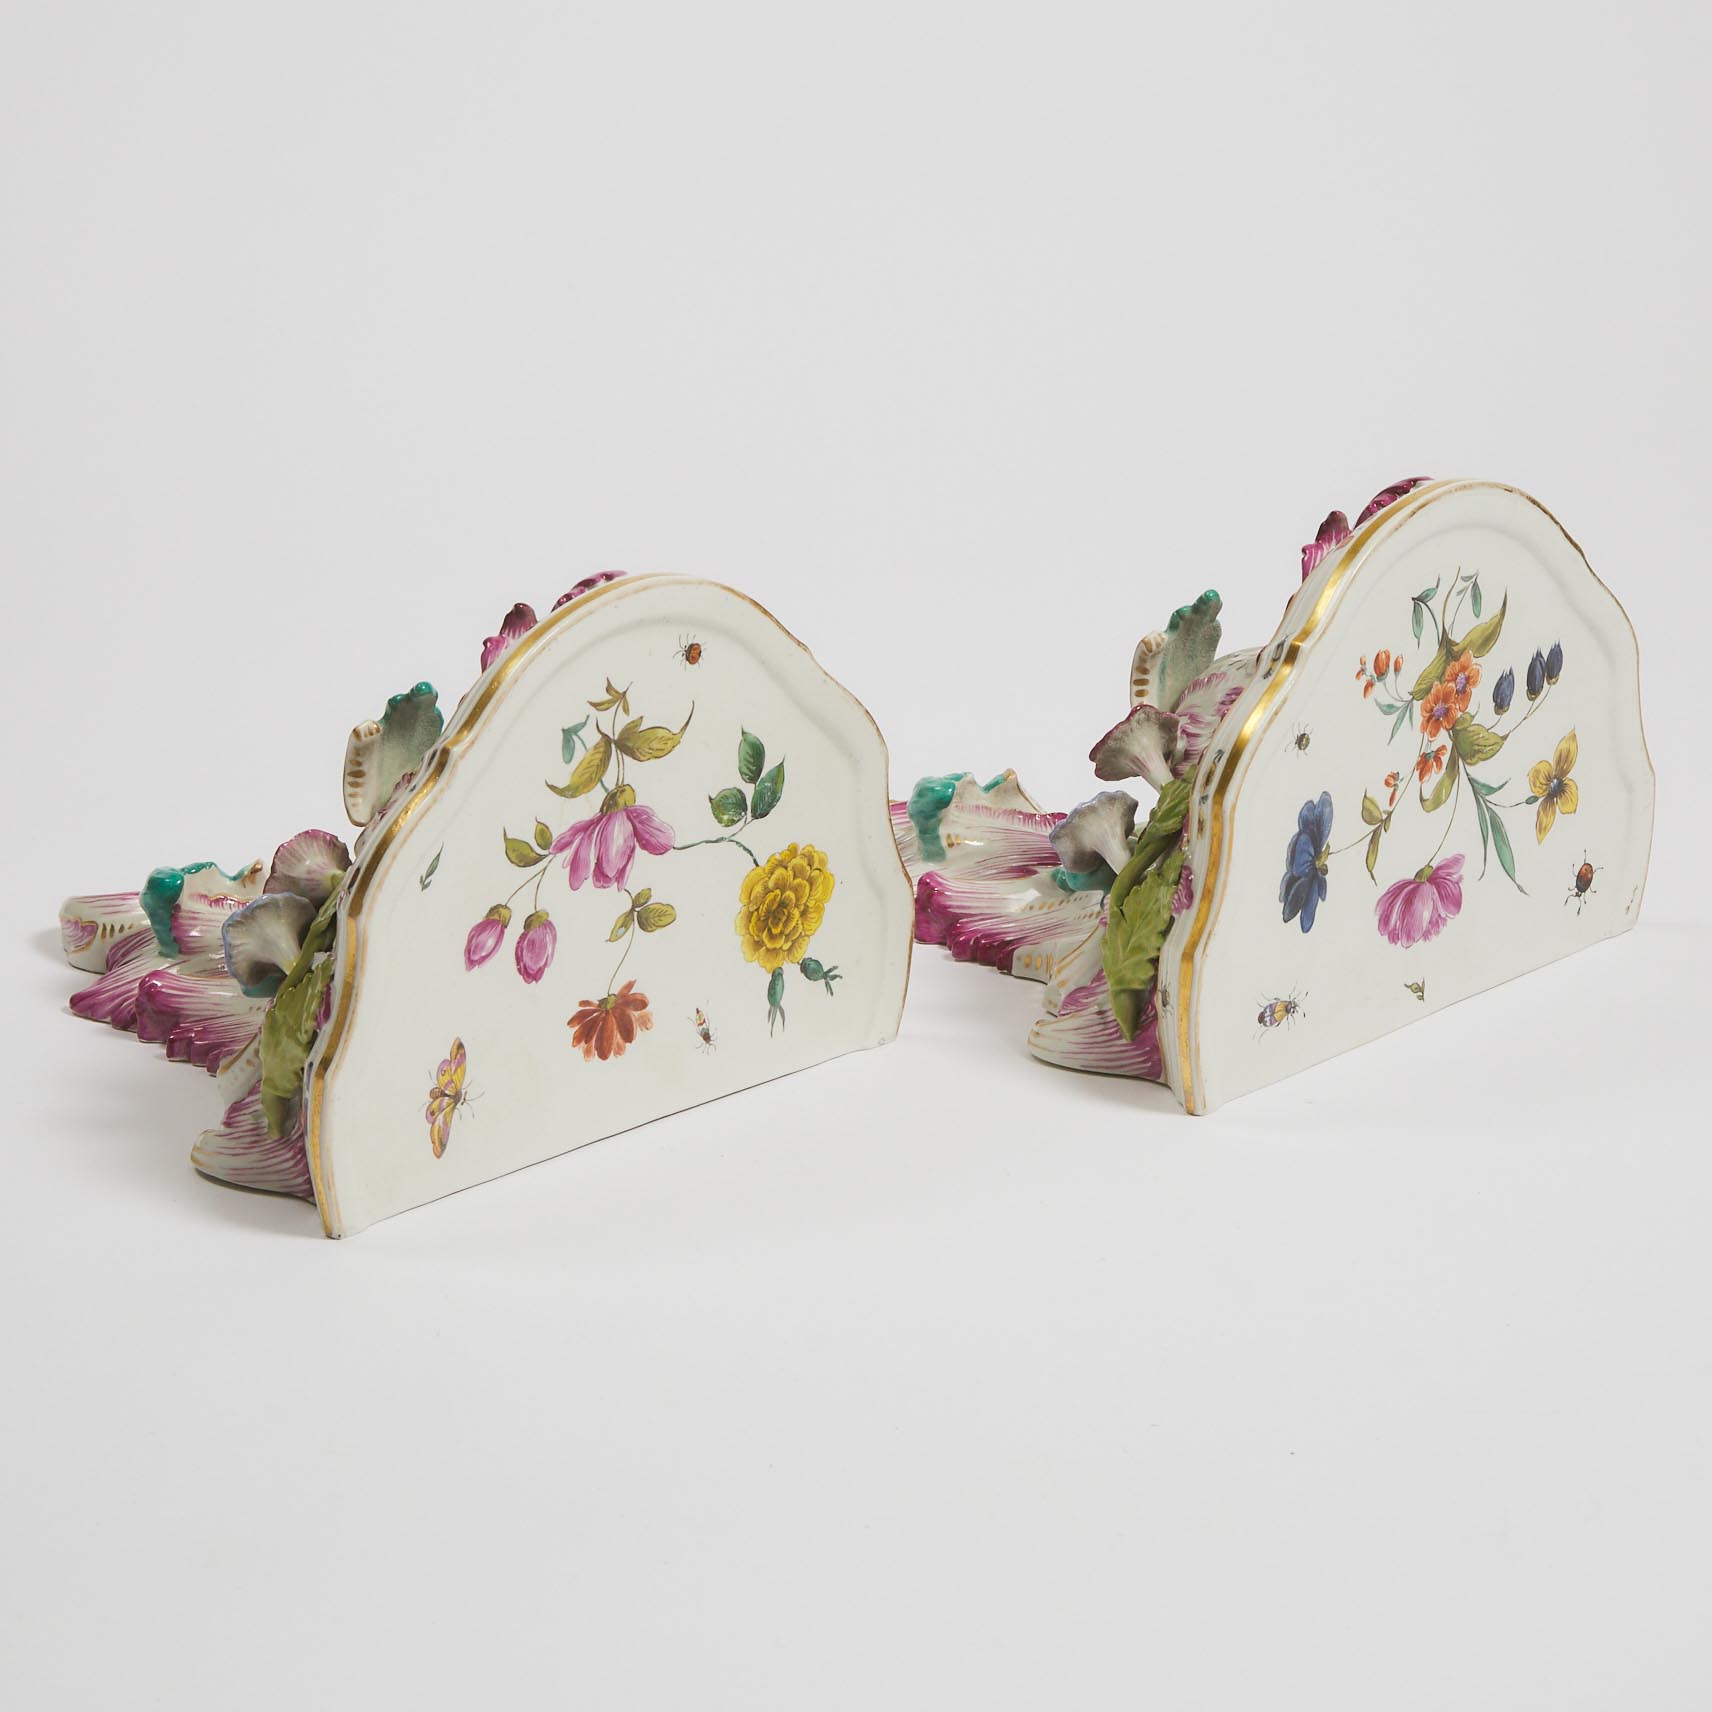 Pair of Berlin Wall Brackets, late 19th/early 20th century